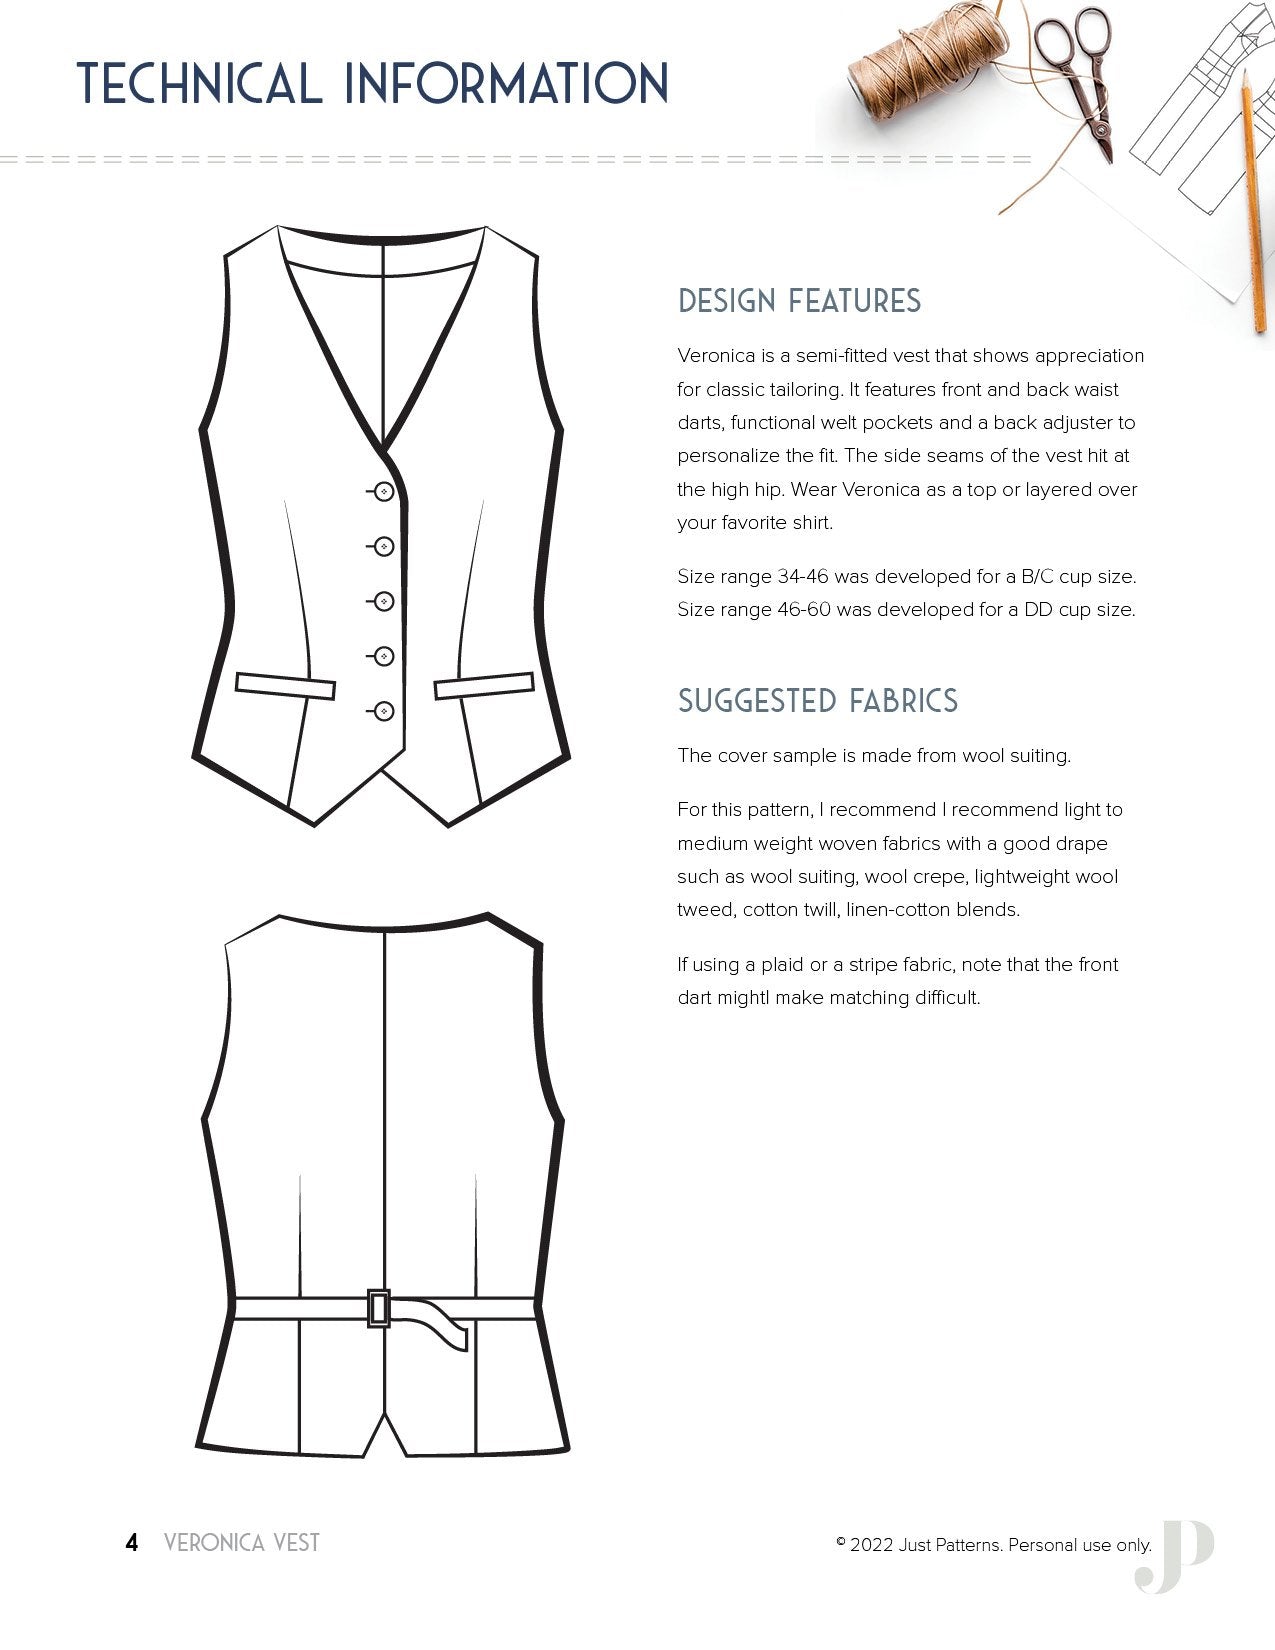 How To Sew The Side Seam Pocket Pattern - The Creative Curator